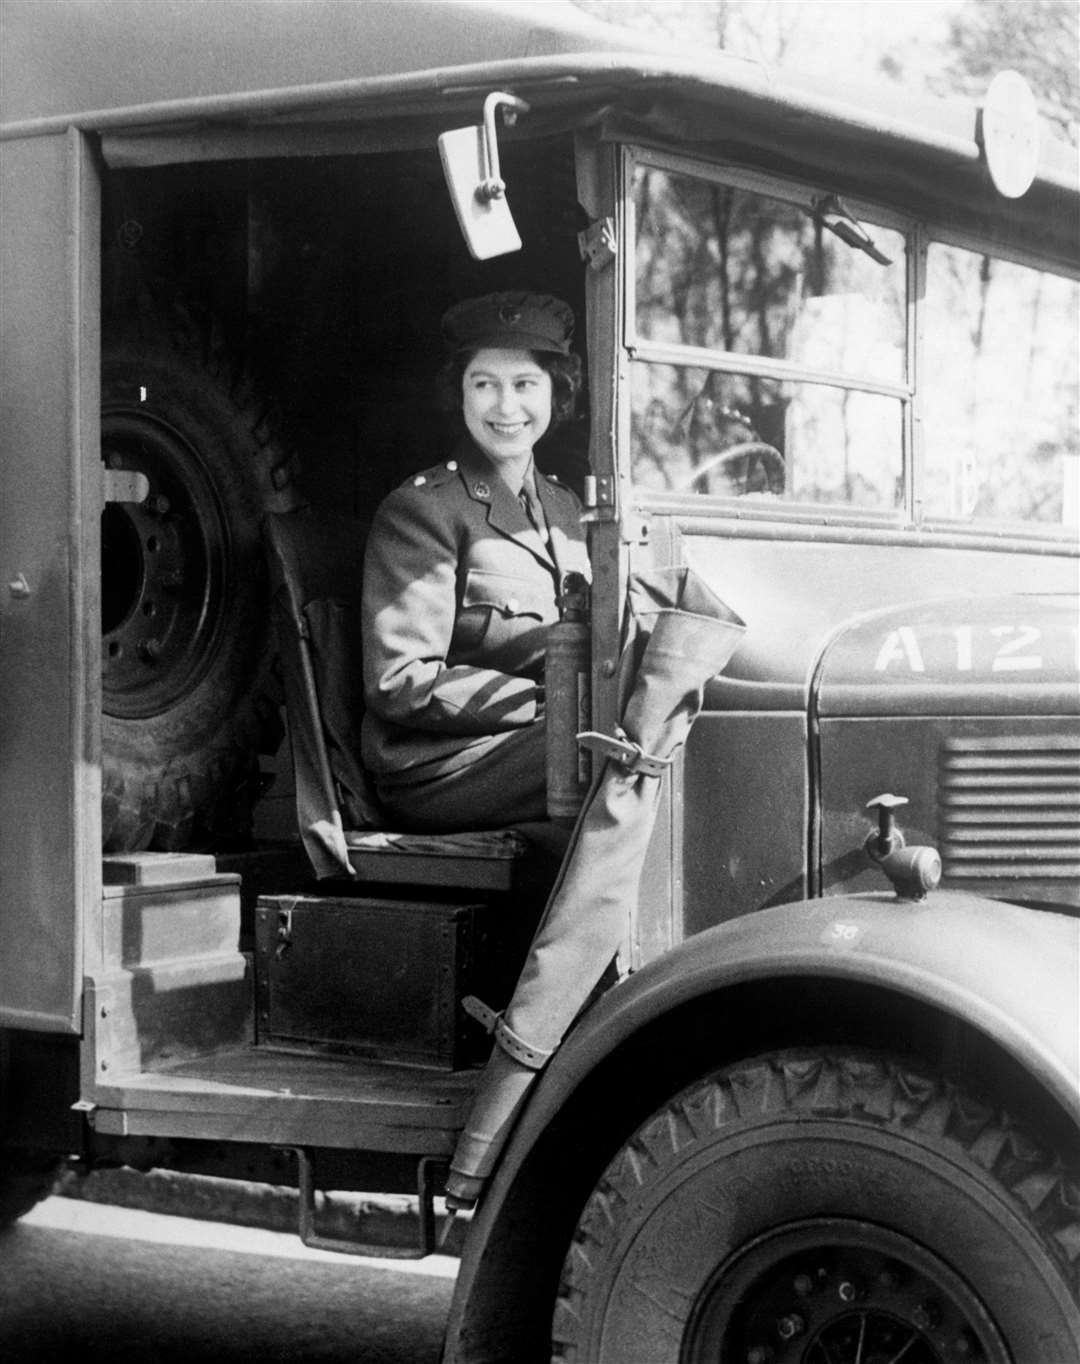 Princess Elizabeth in her uniform at the wheel of an army vehicle while serving in the ATS in 1945 (PA)